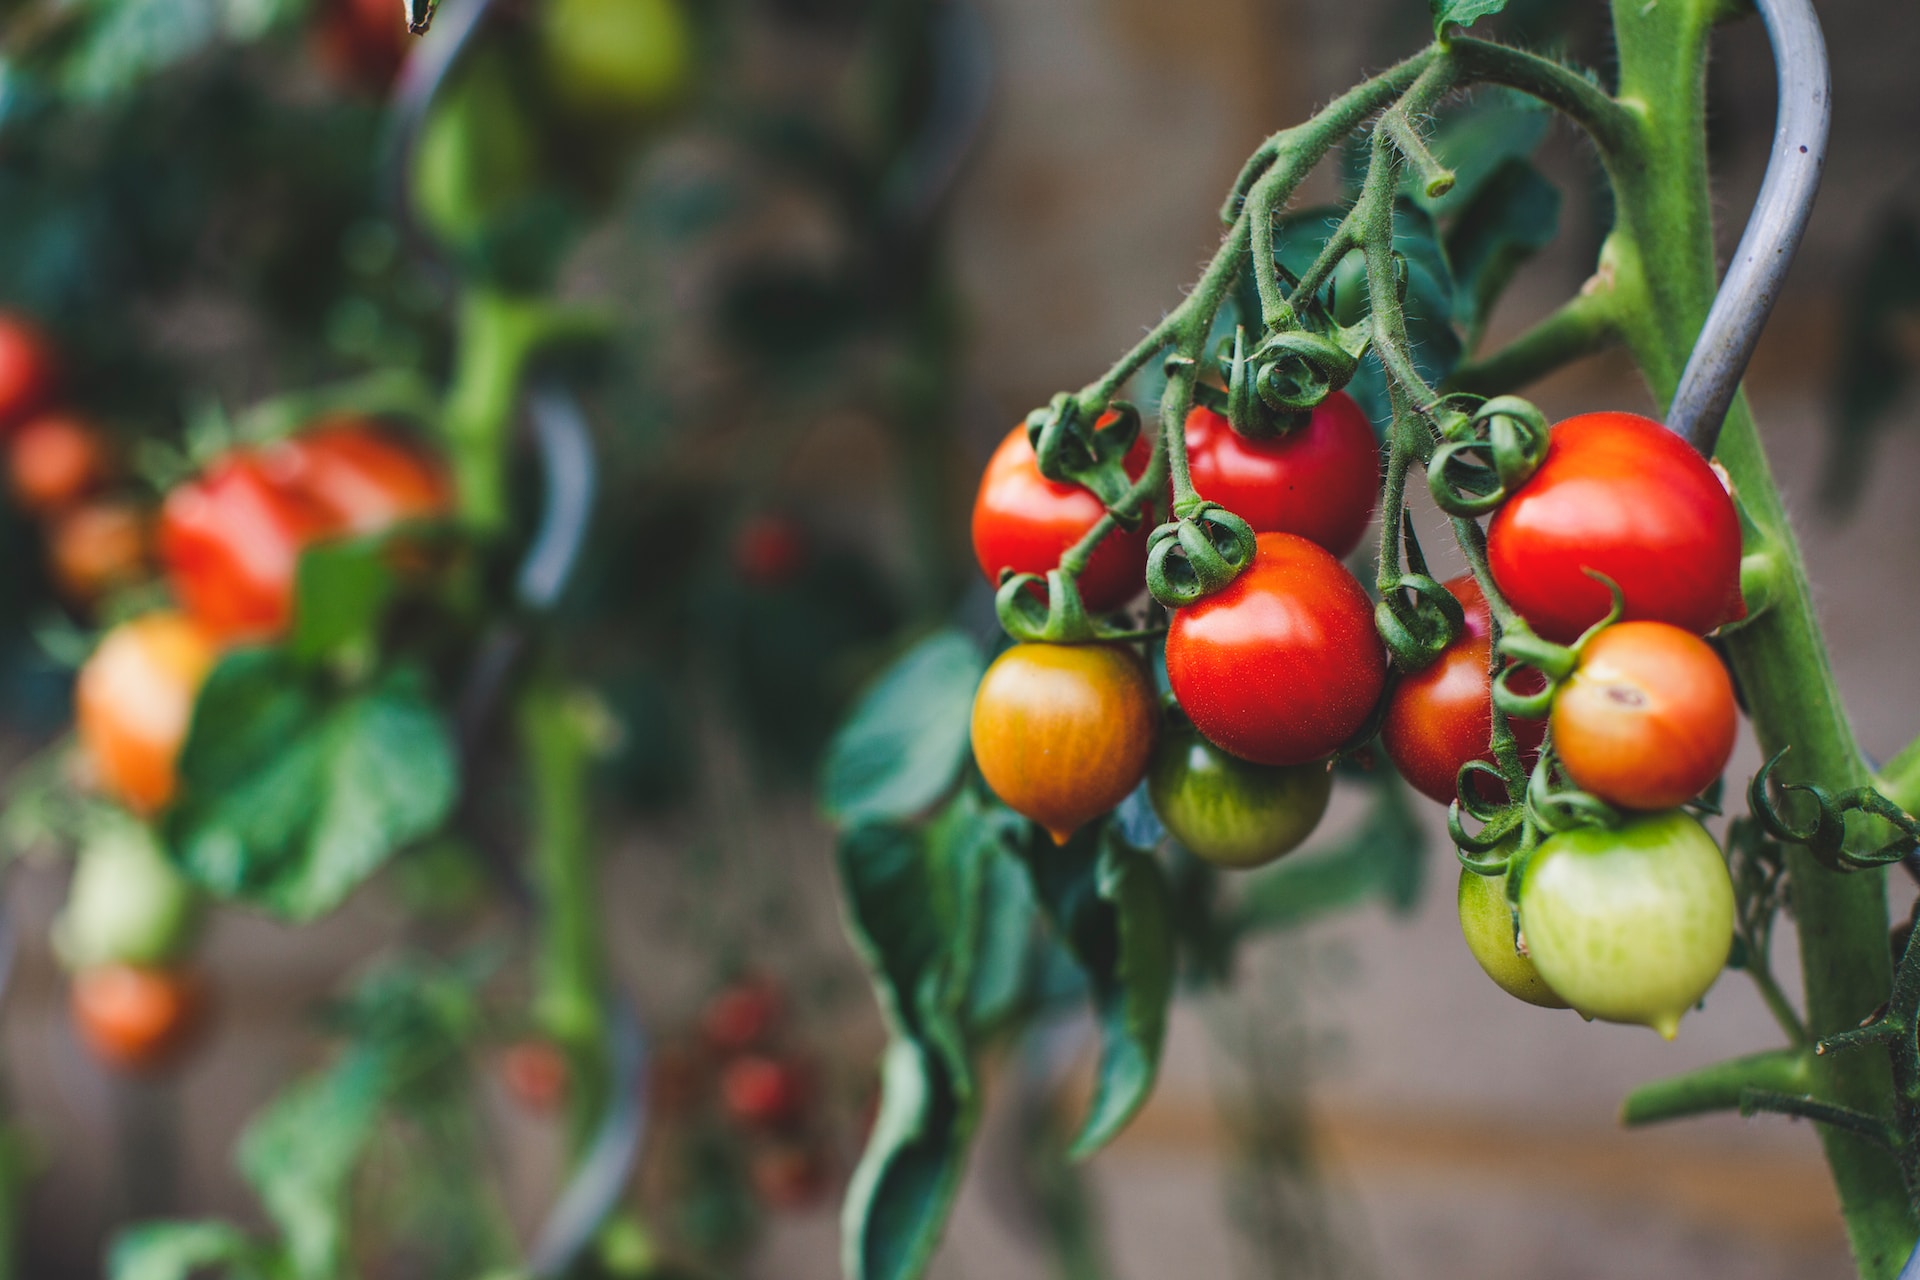 10 Surprising Facts About Tomatoes You Need to Know